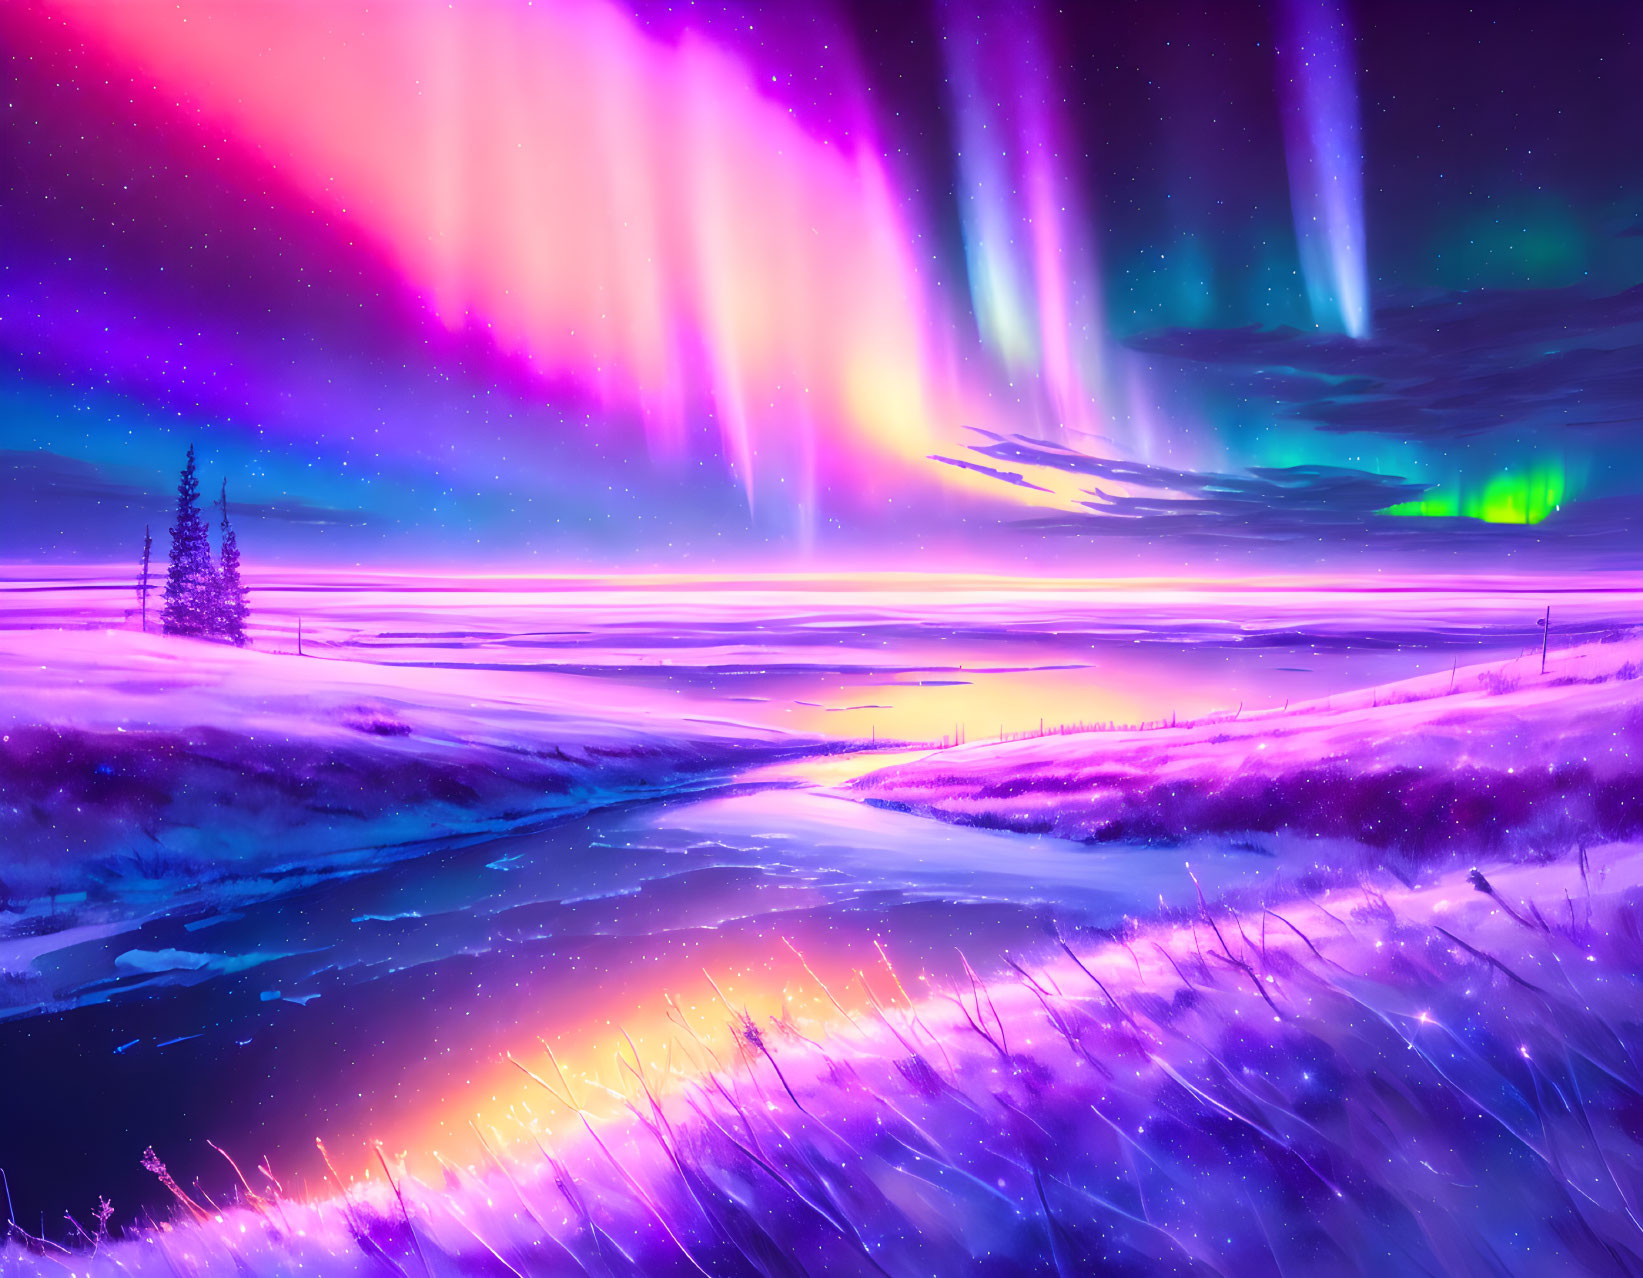 Northern Lights shimmer above snowy landscape with sunset glow and icy river.